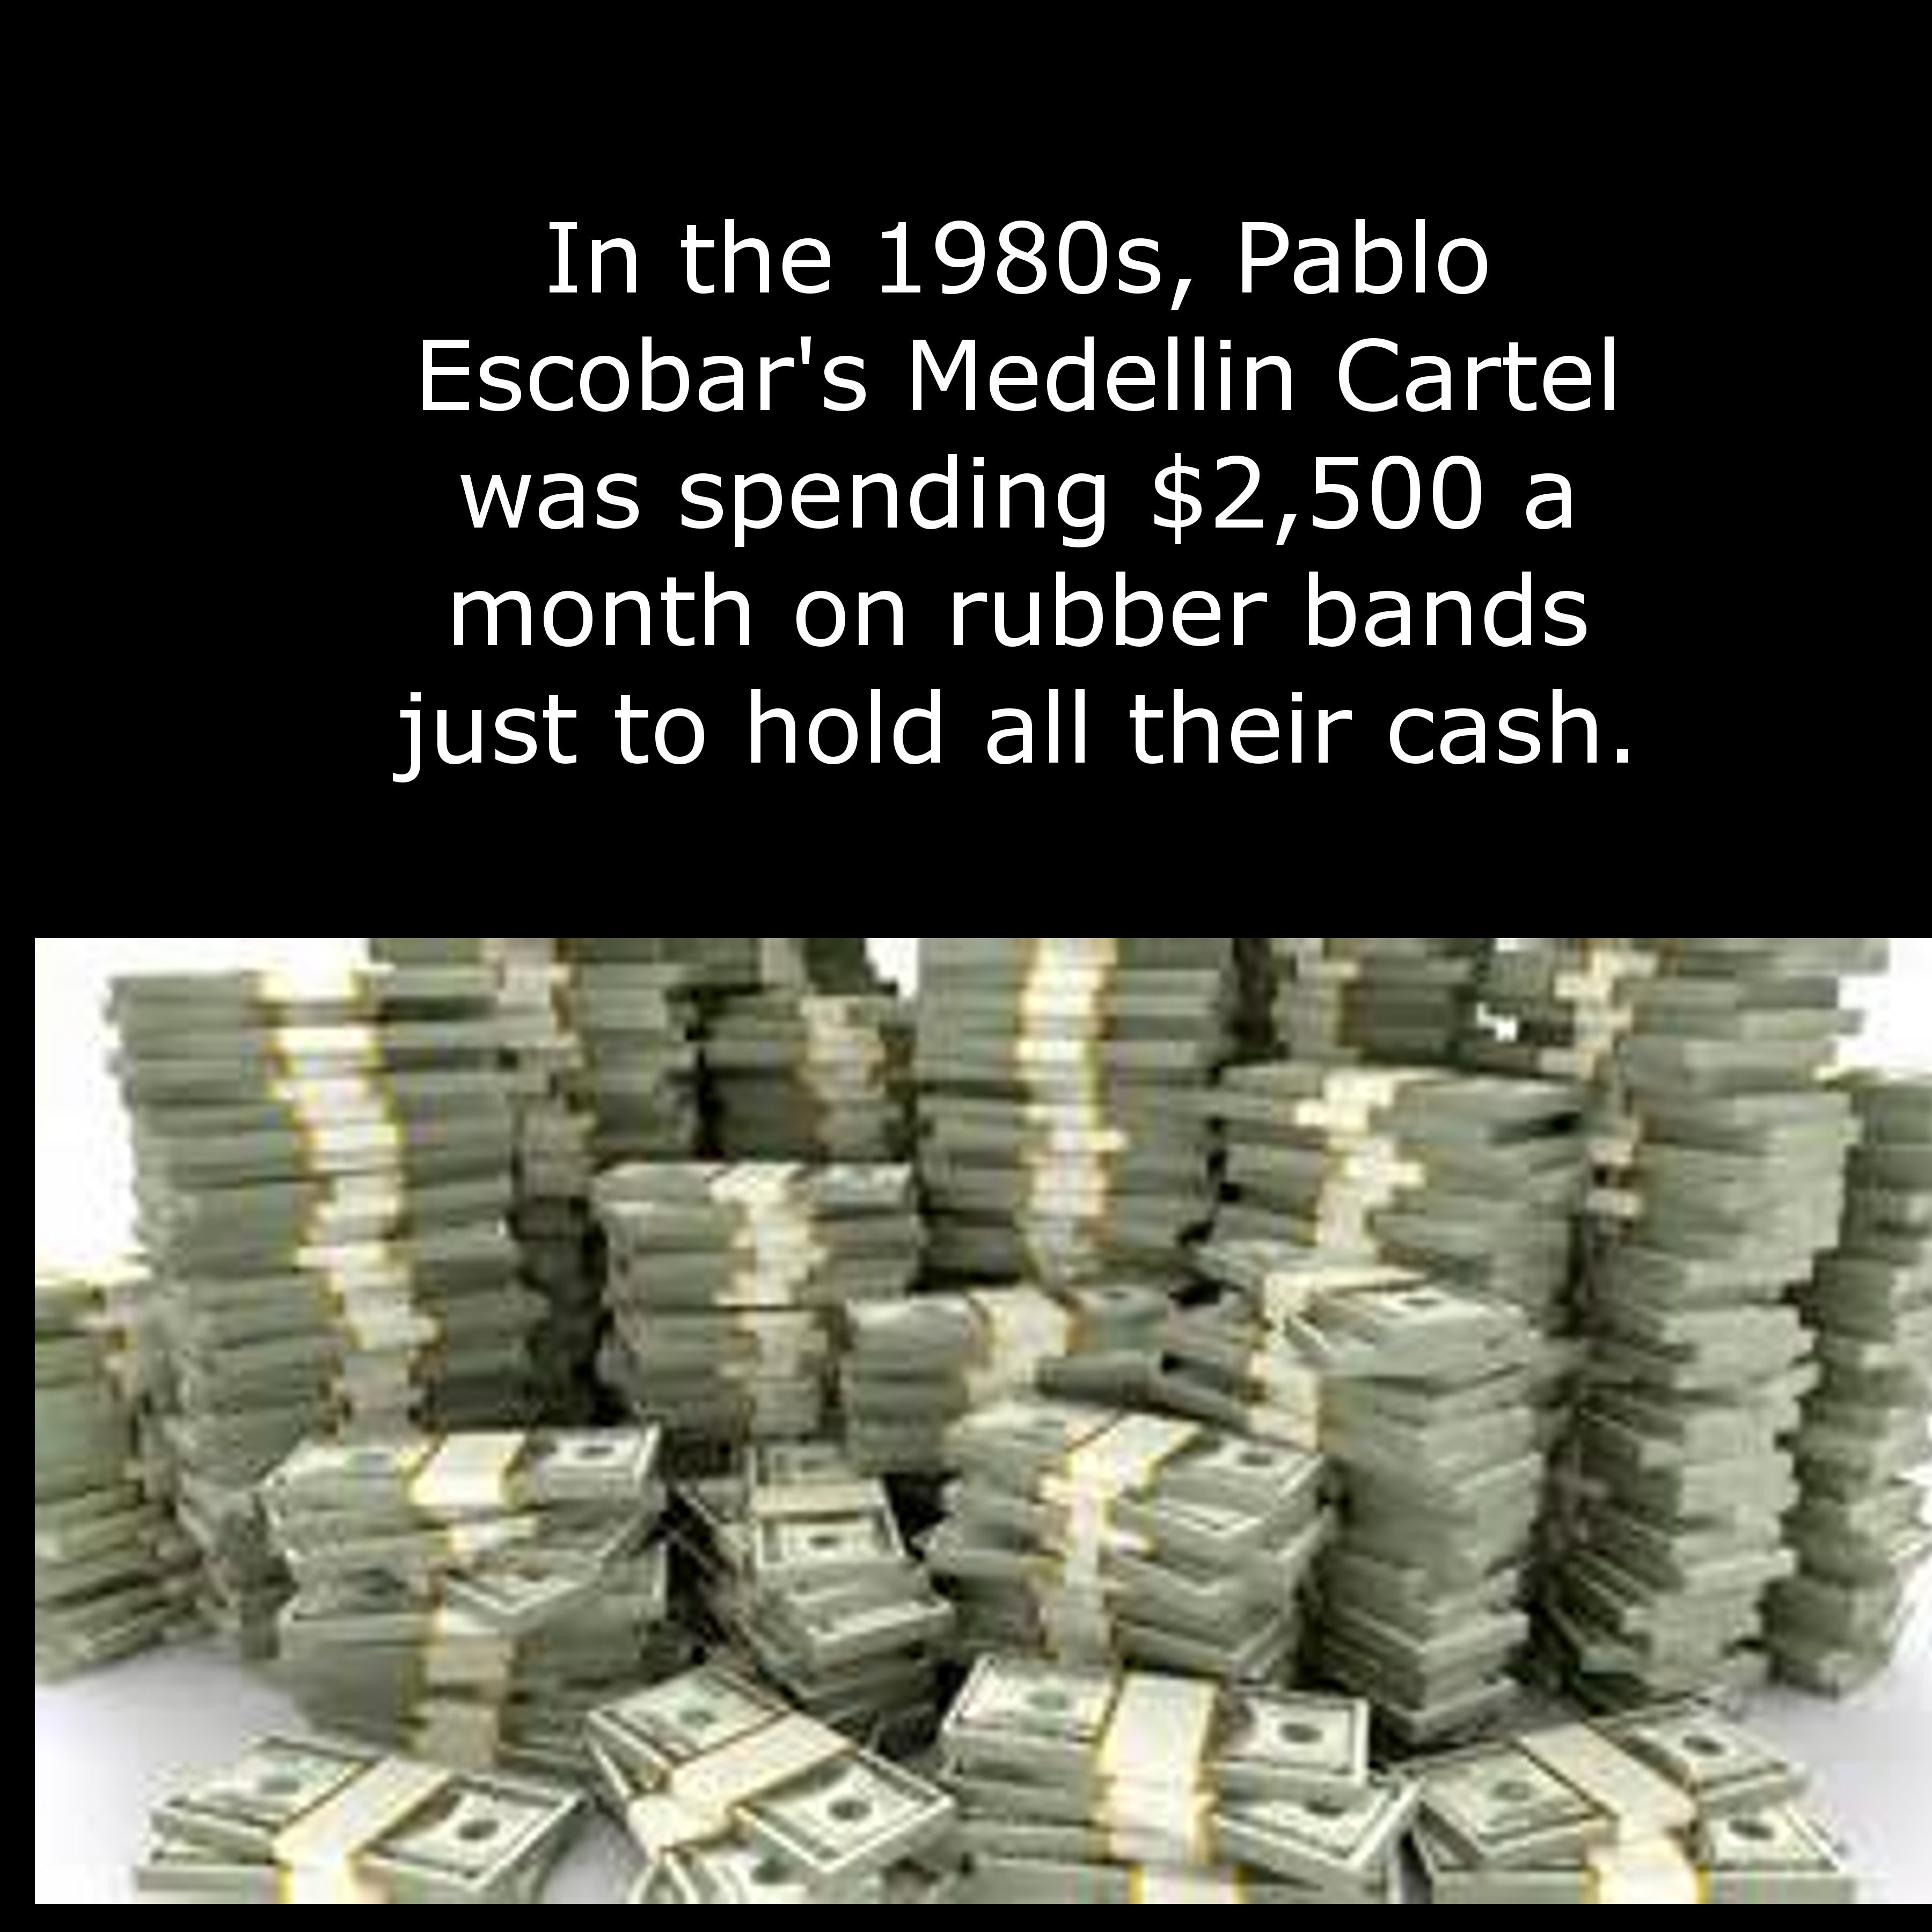 stacks of money - In the 1980s, Pablo Escobar's Medellin Cartel was spending $2,500 a month on rubber bands just to hold all their cash.